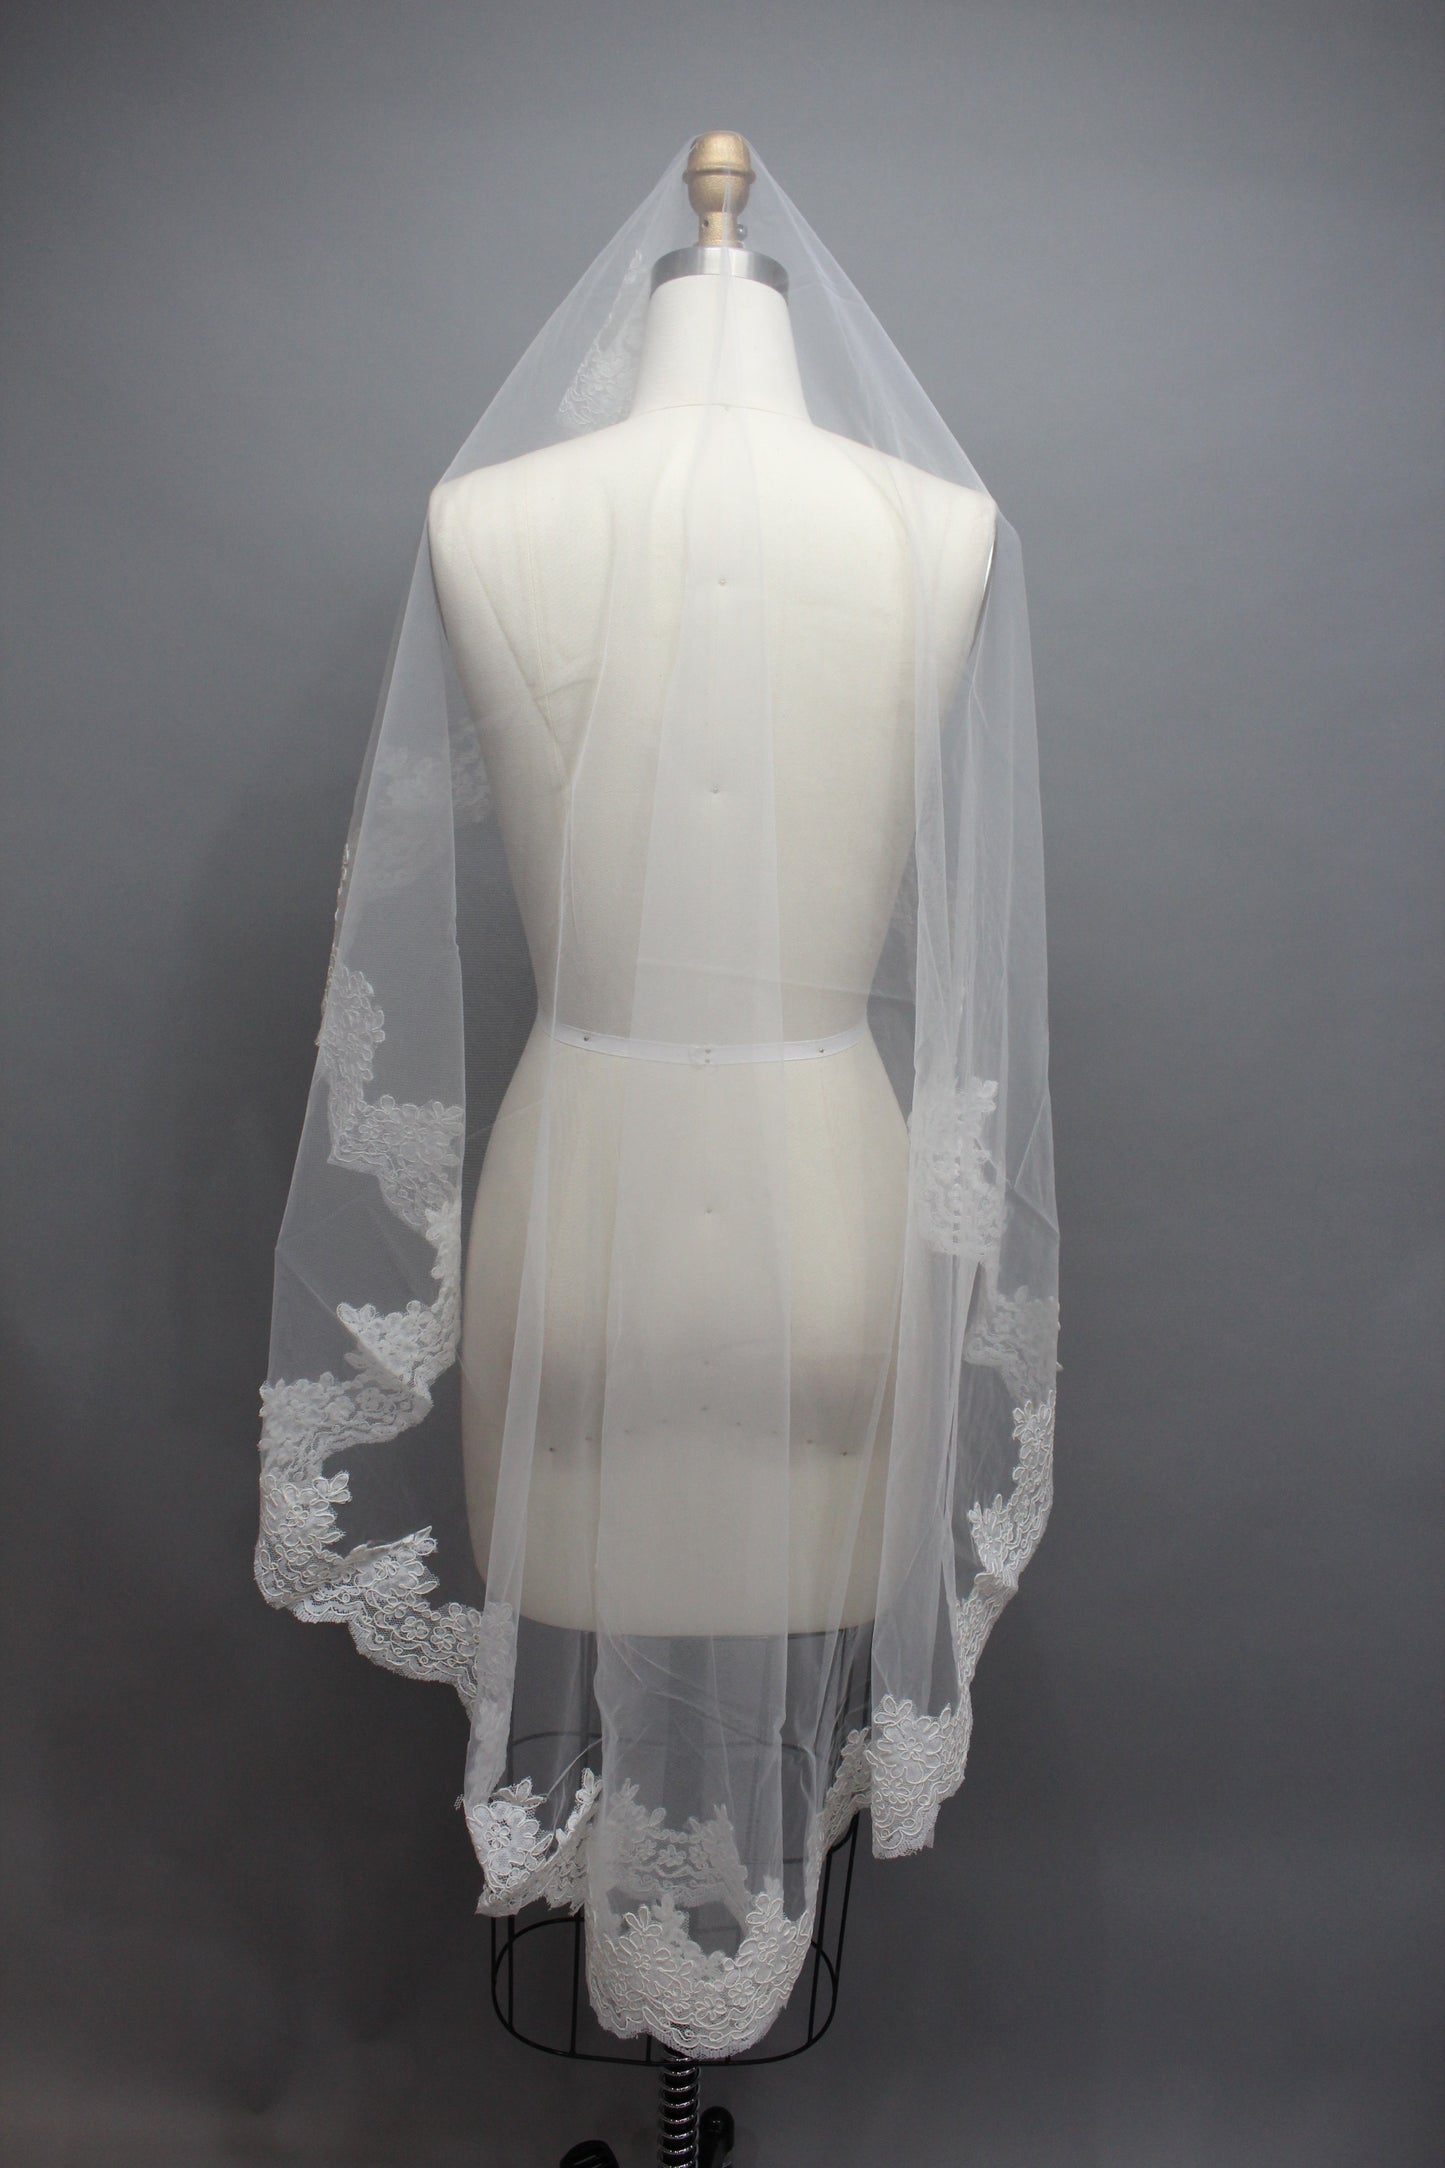 Enchanting Lace Veil - Adding Romance and Elegance to Your Wedding T266